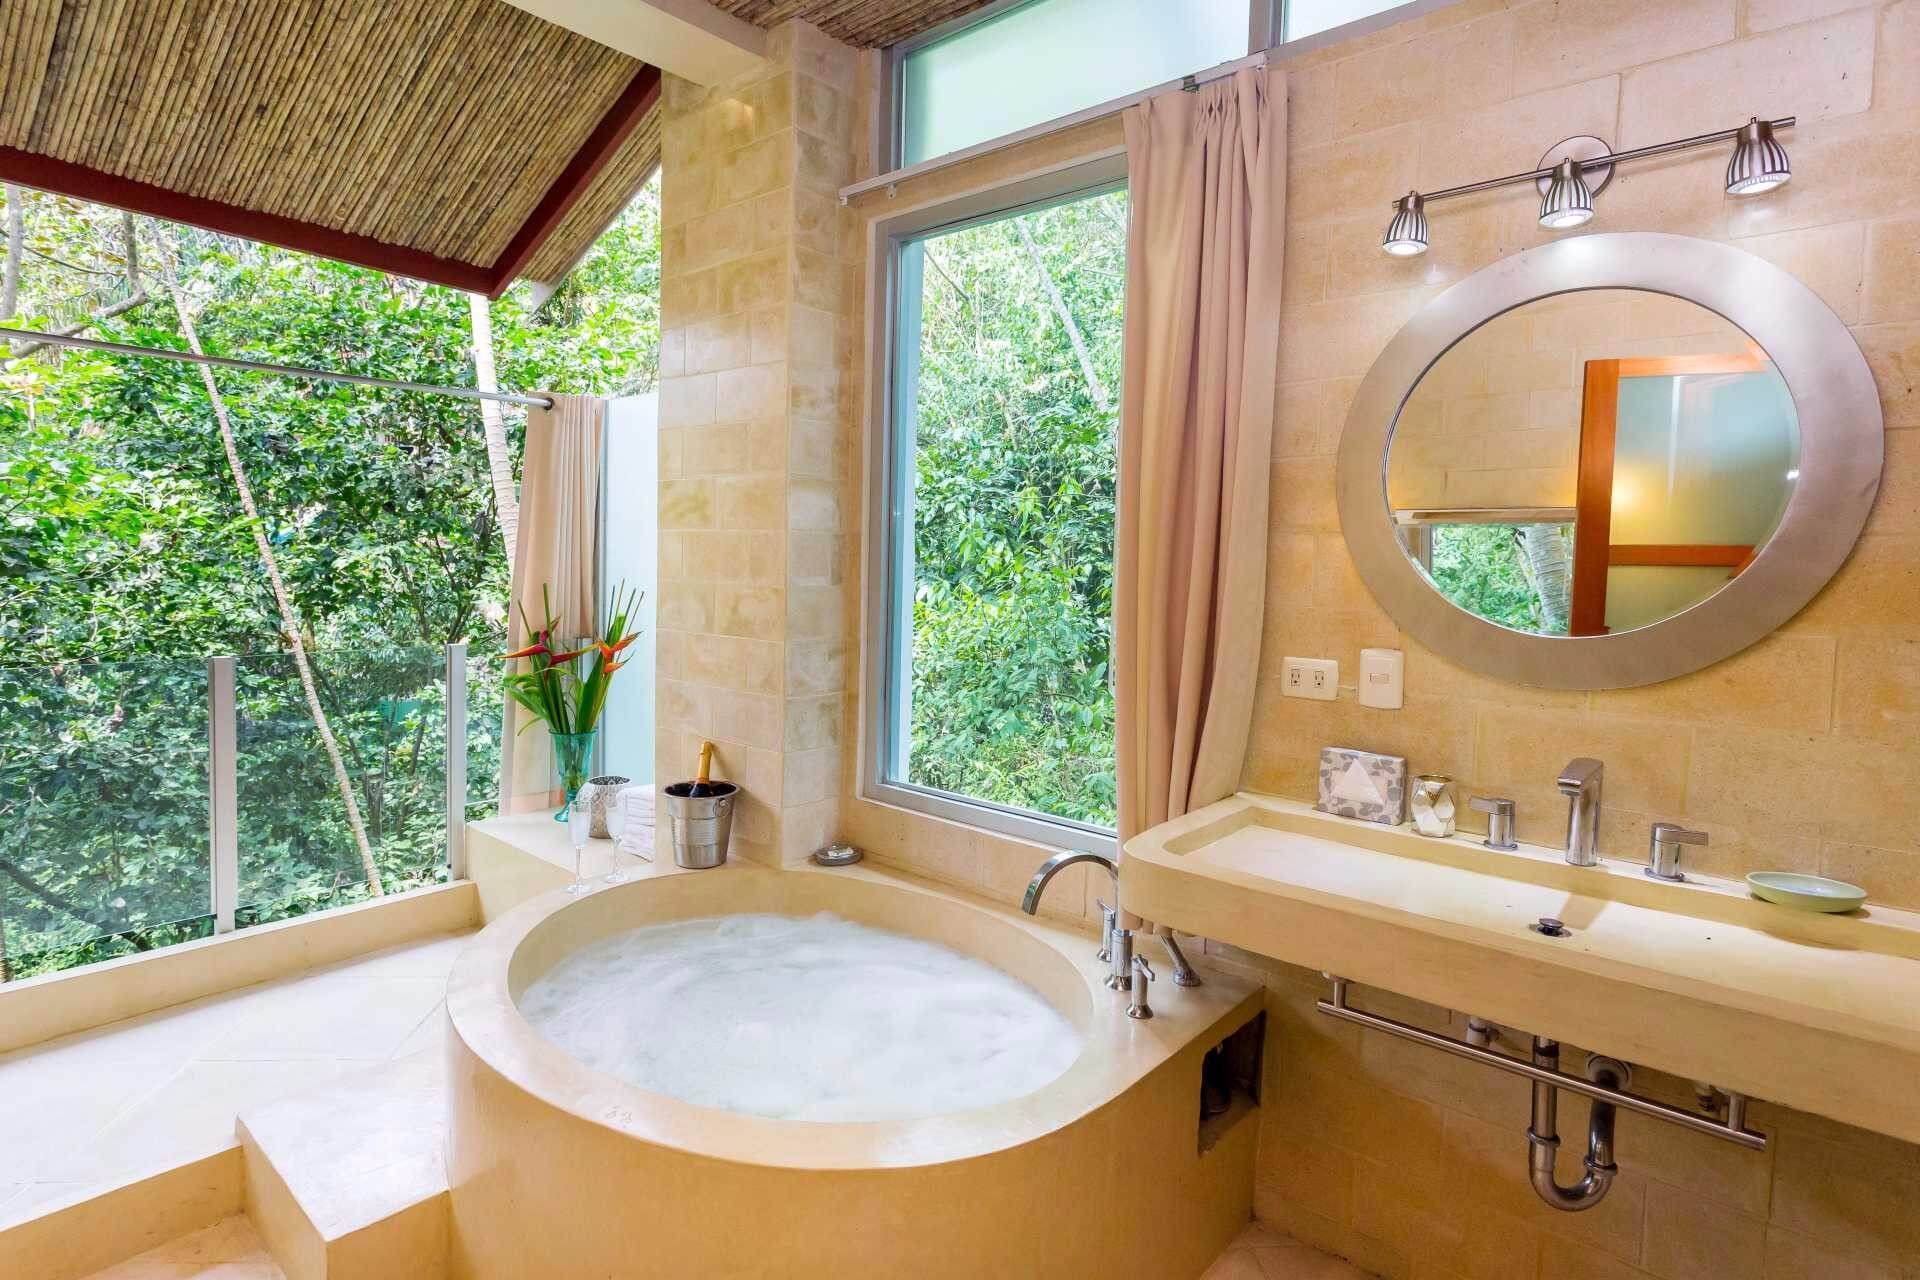 Guest bathroom with stone round tub